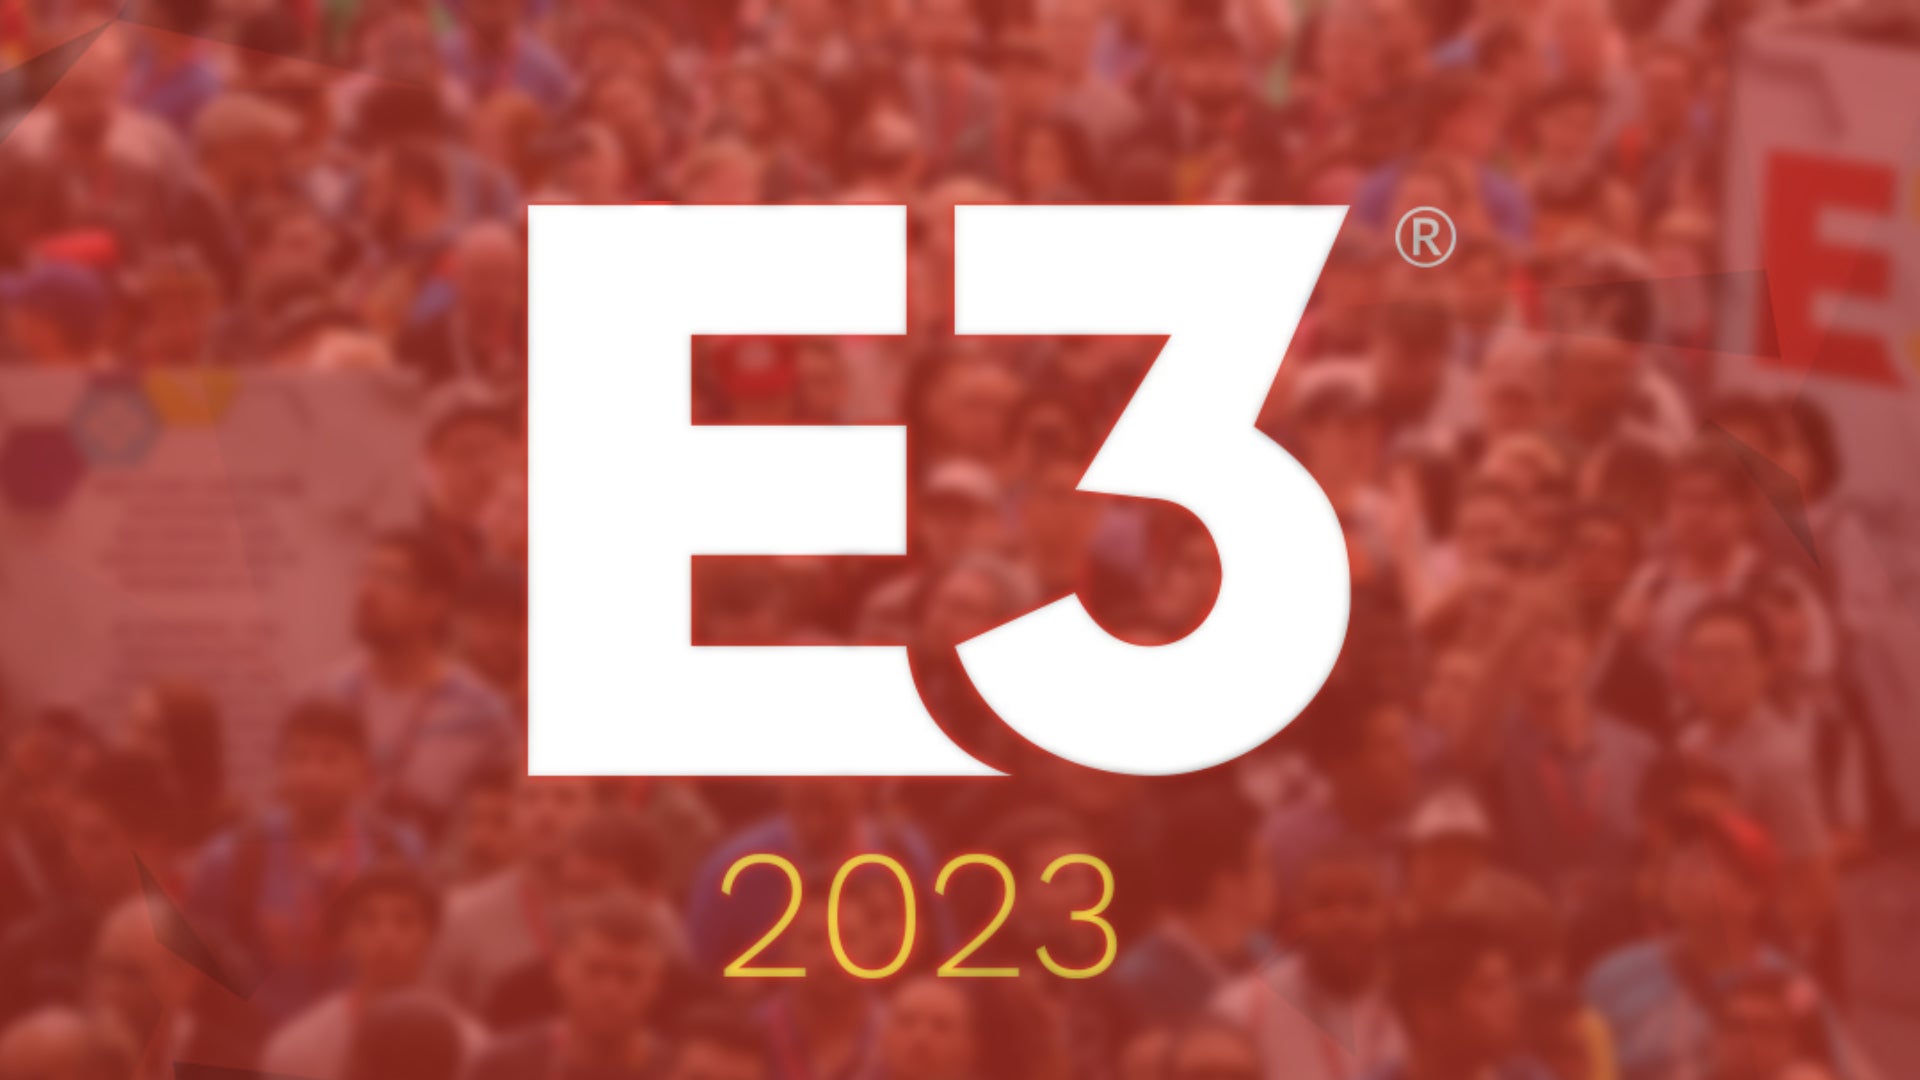 Image for E3 2023 dates revealed as show hosts separate public and business areas